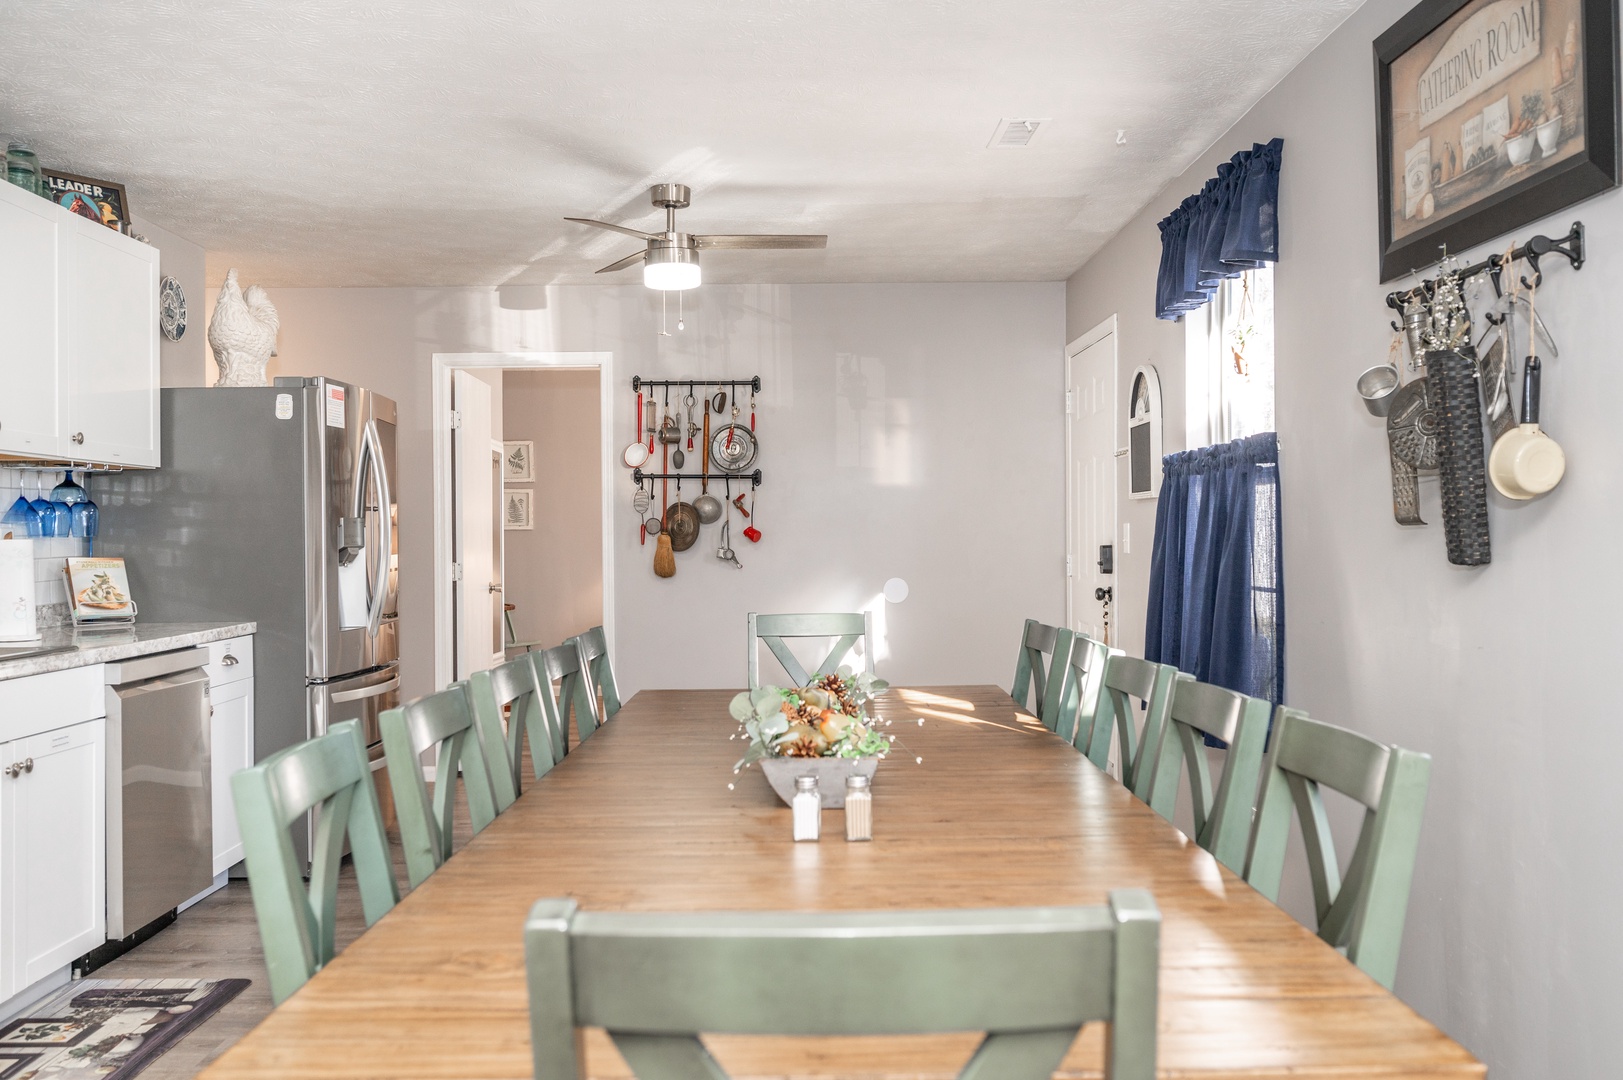 Gather for meals together at the dining table, with seating for 12